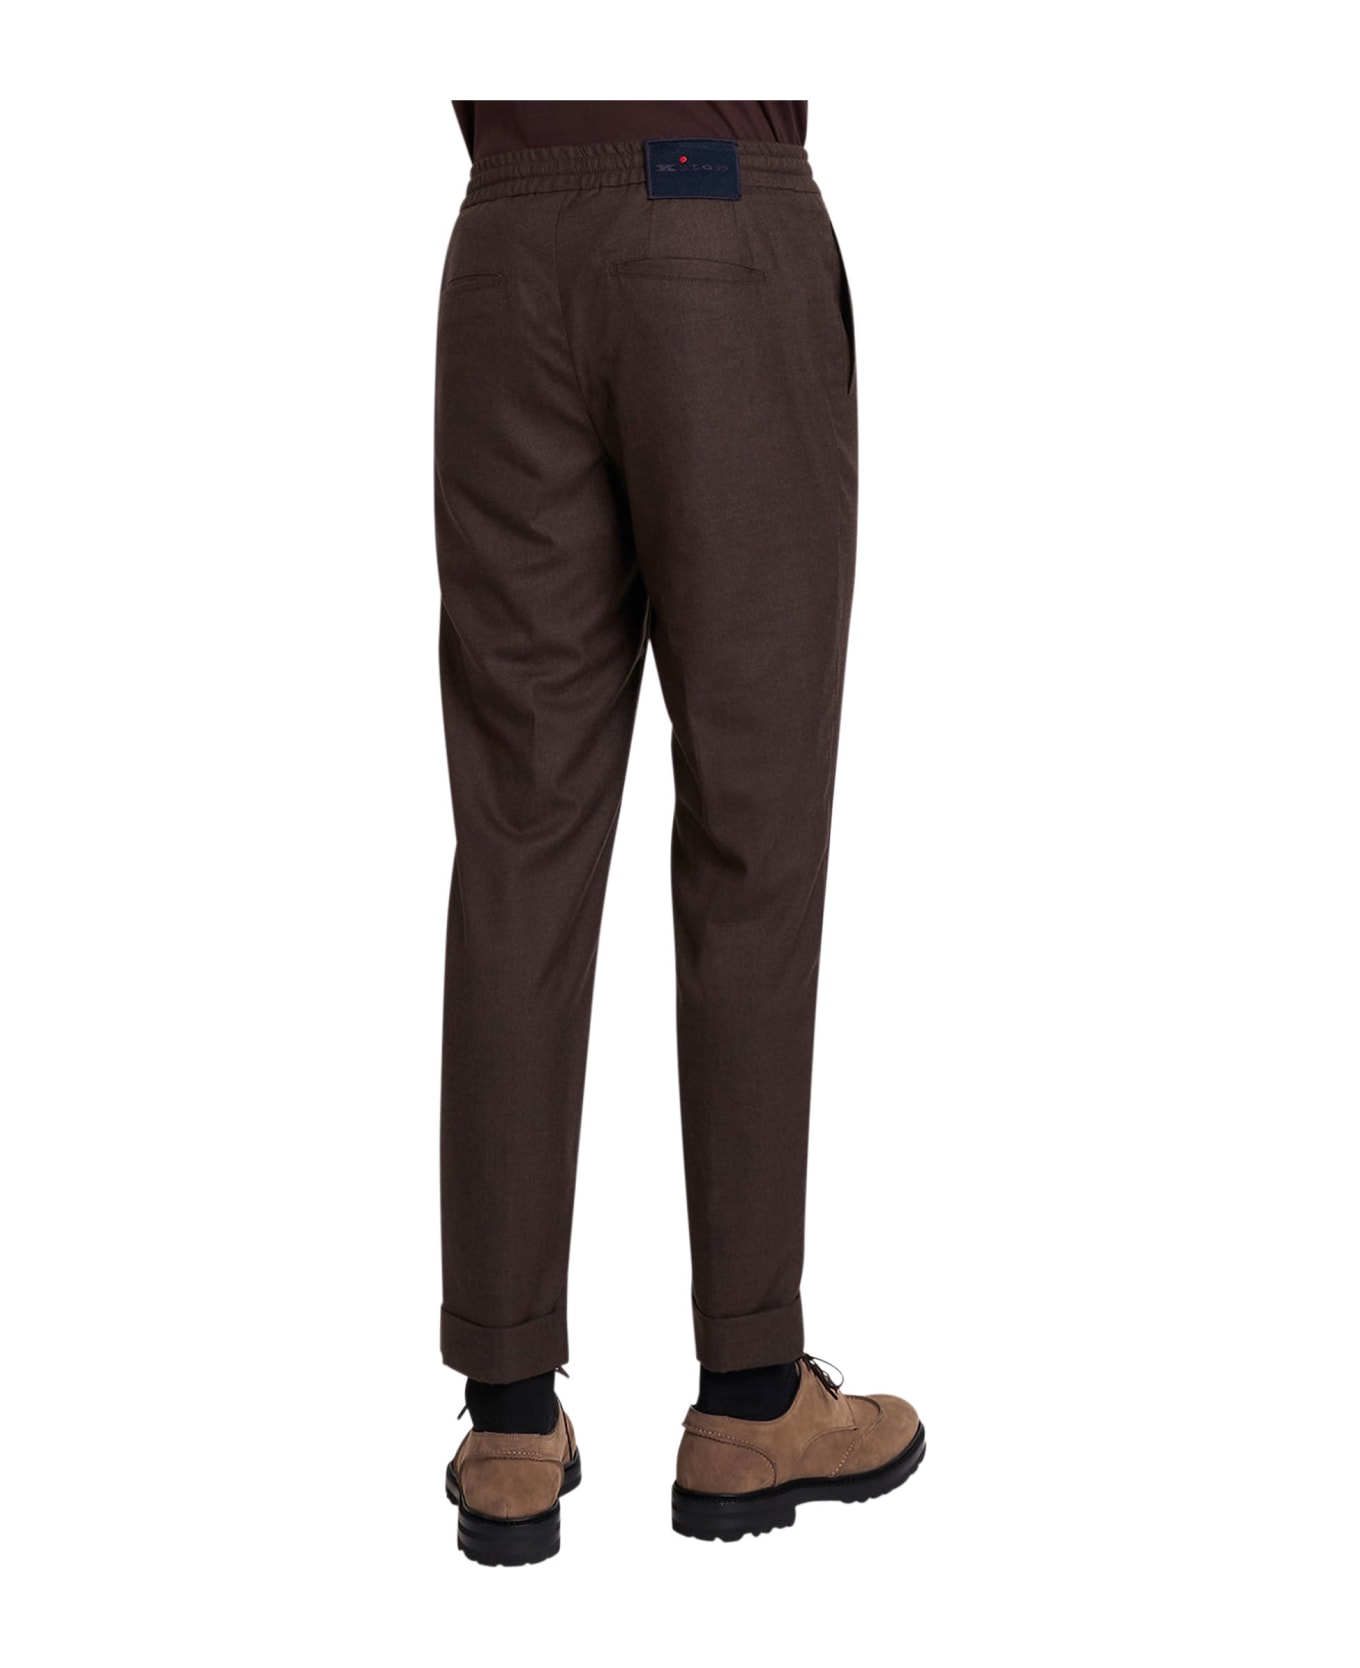 Kiton Trousers Cashmere - BROWN